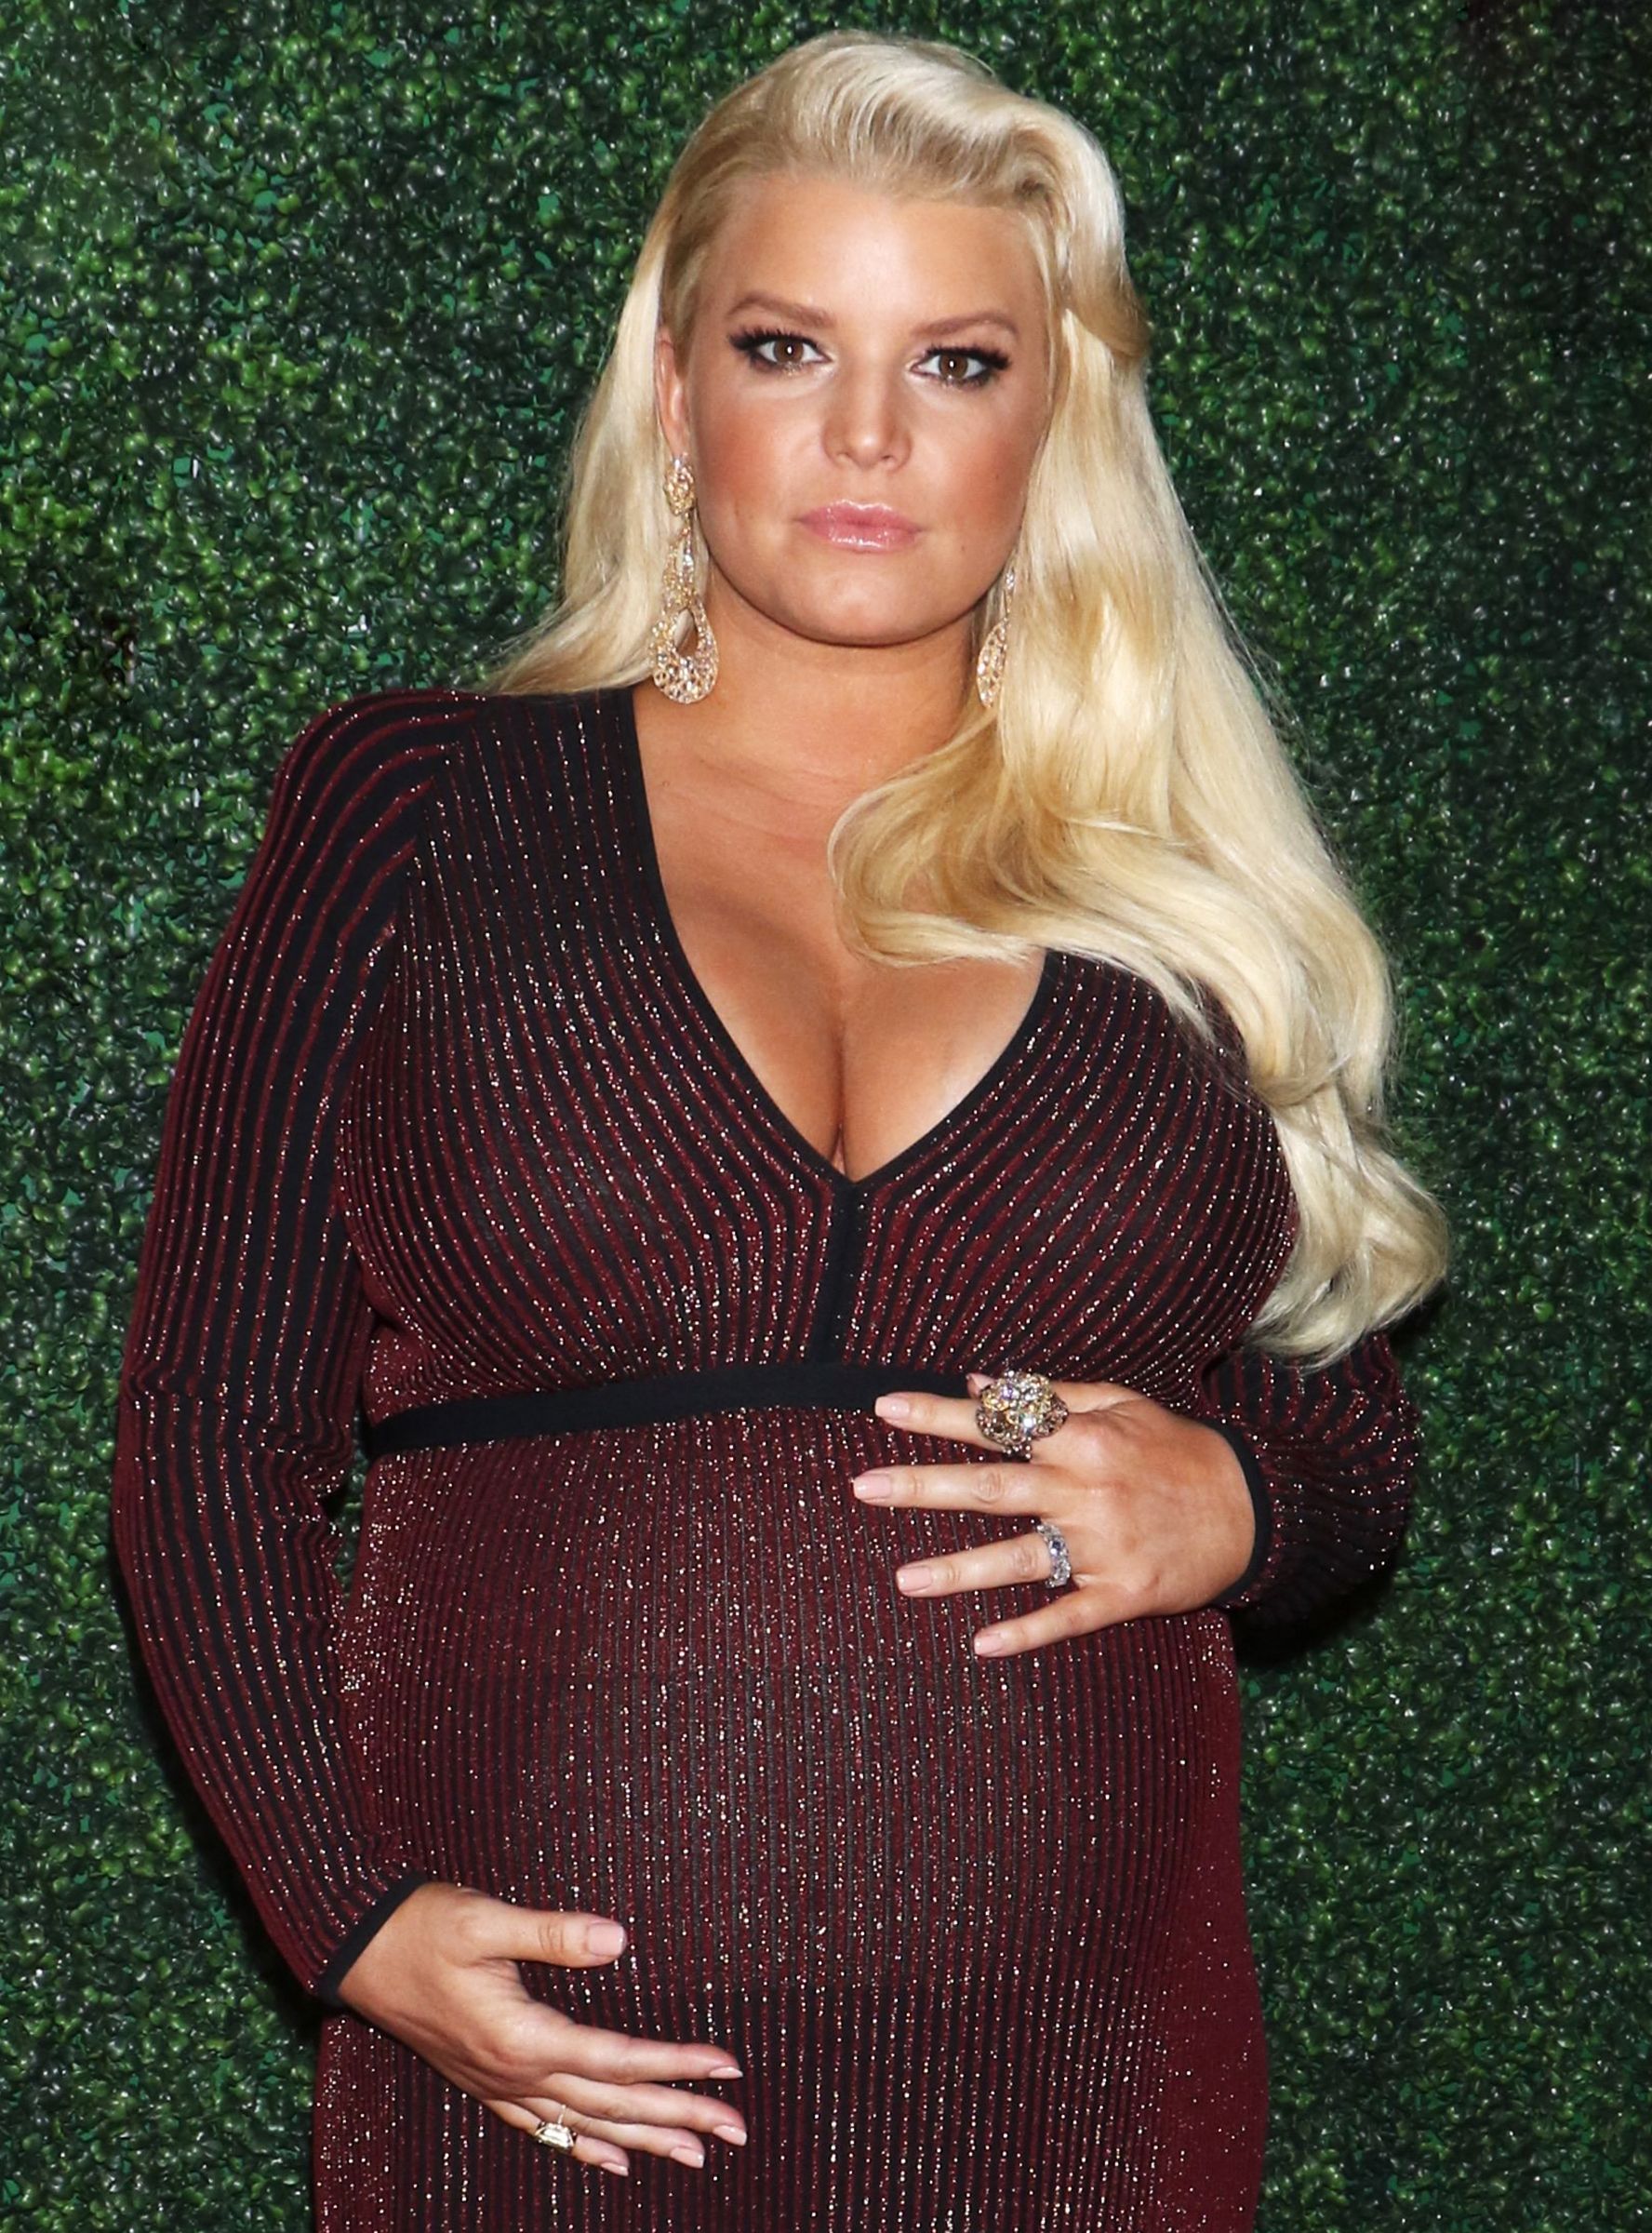 Pregnant Jessica Simpson Iii 14 By Jerry999999 On Deviantart